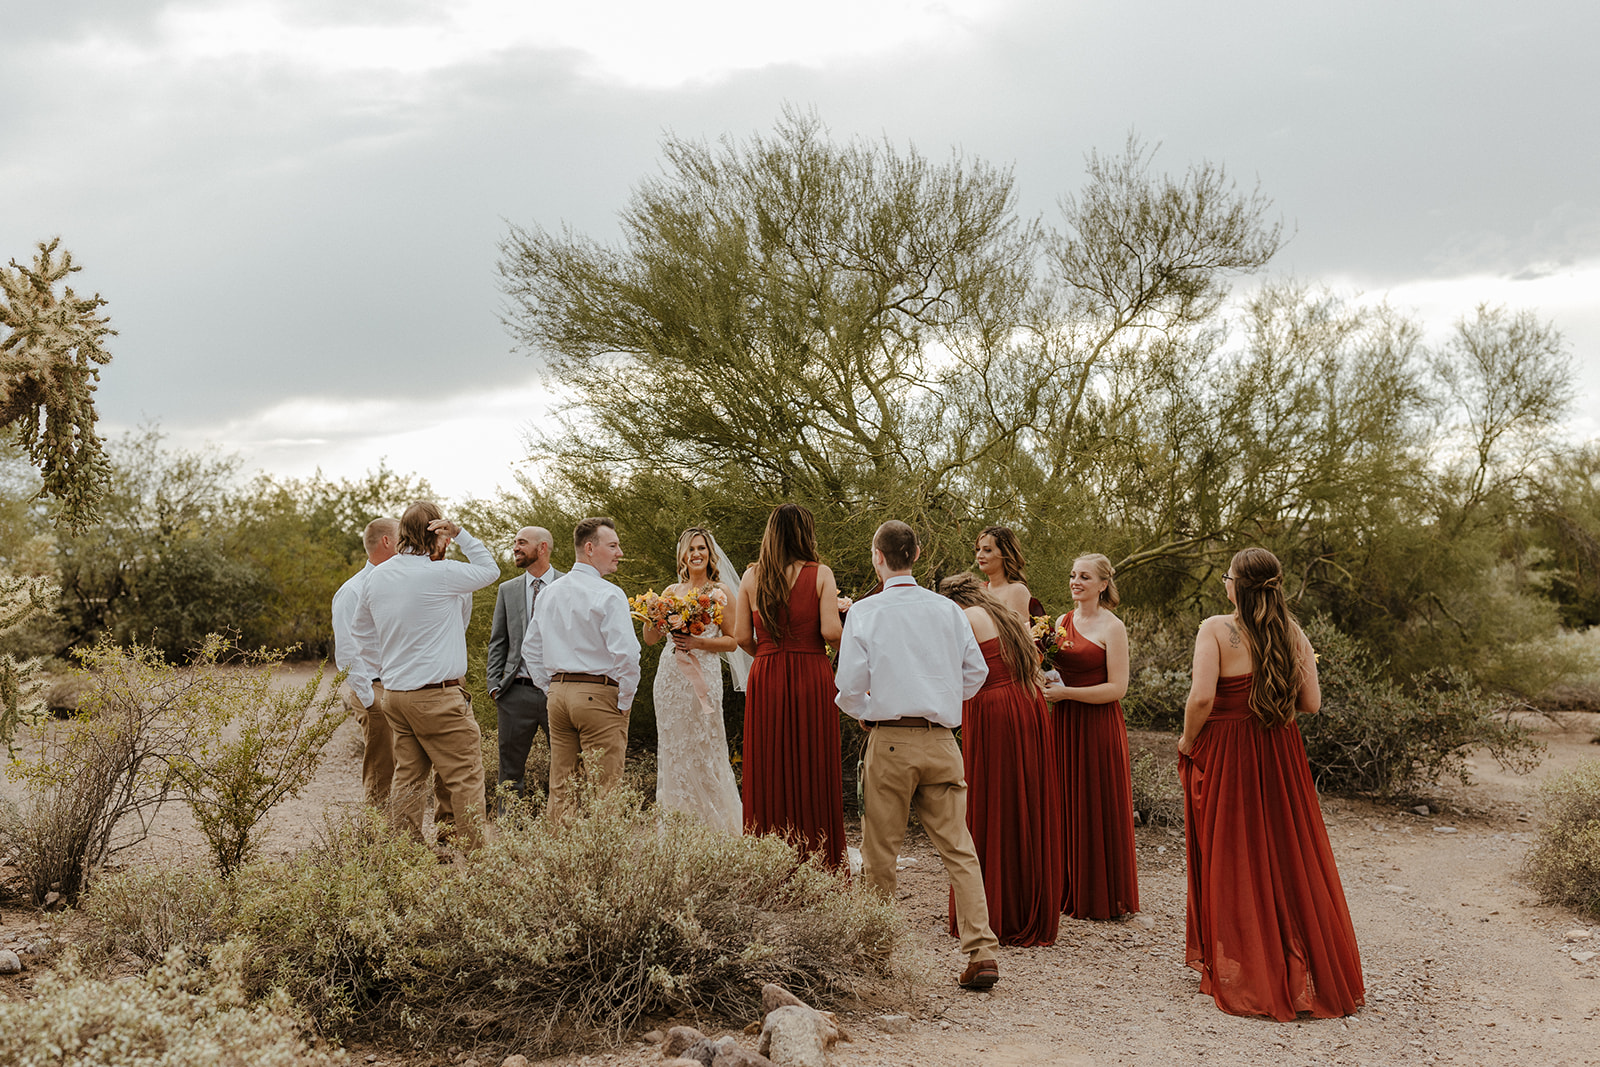 wedding party celebrates together after the dreamy Arizona wedding day 